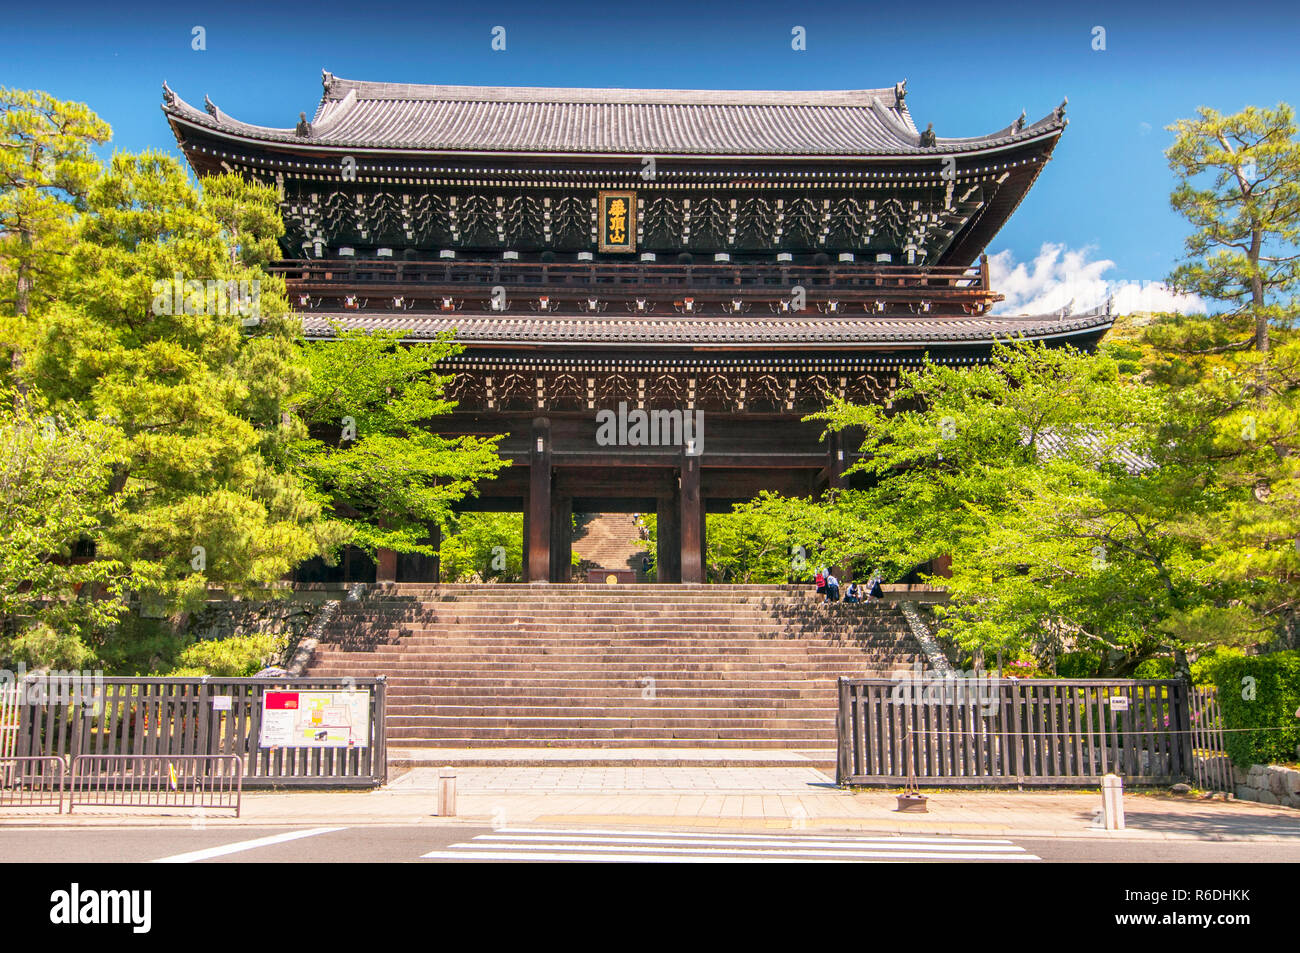 The Wooden Monumental Gate To Chion-In Buddhist Temple In The Largest In Japan Stock Photo